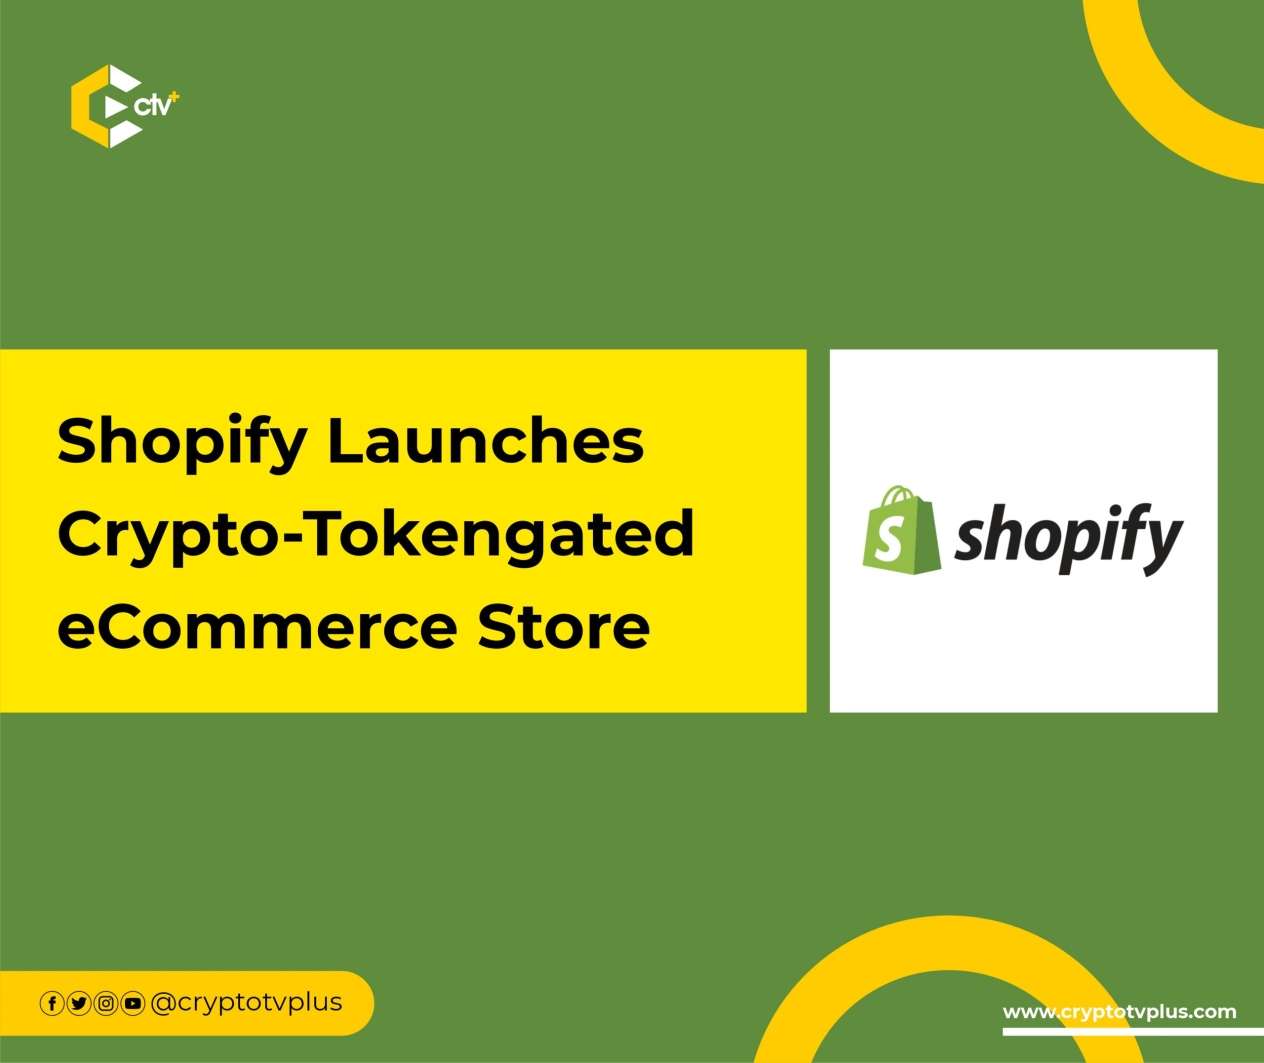 do shopify ecommerce website store to accept btc, eth, binance crypto payments